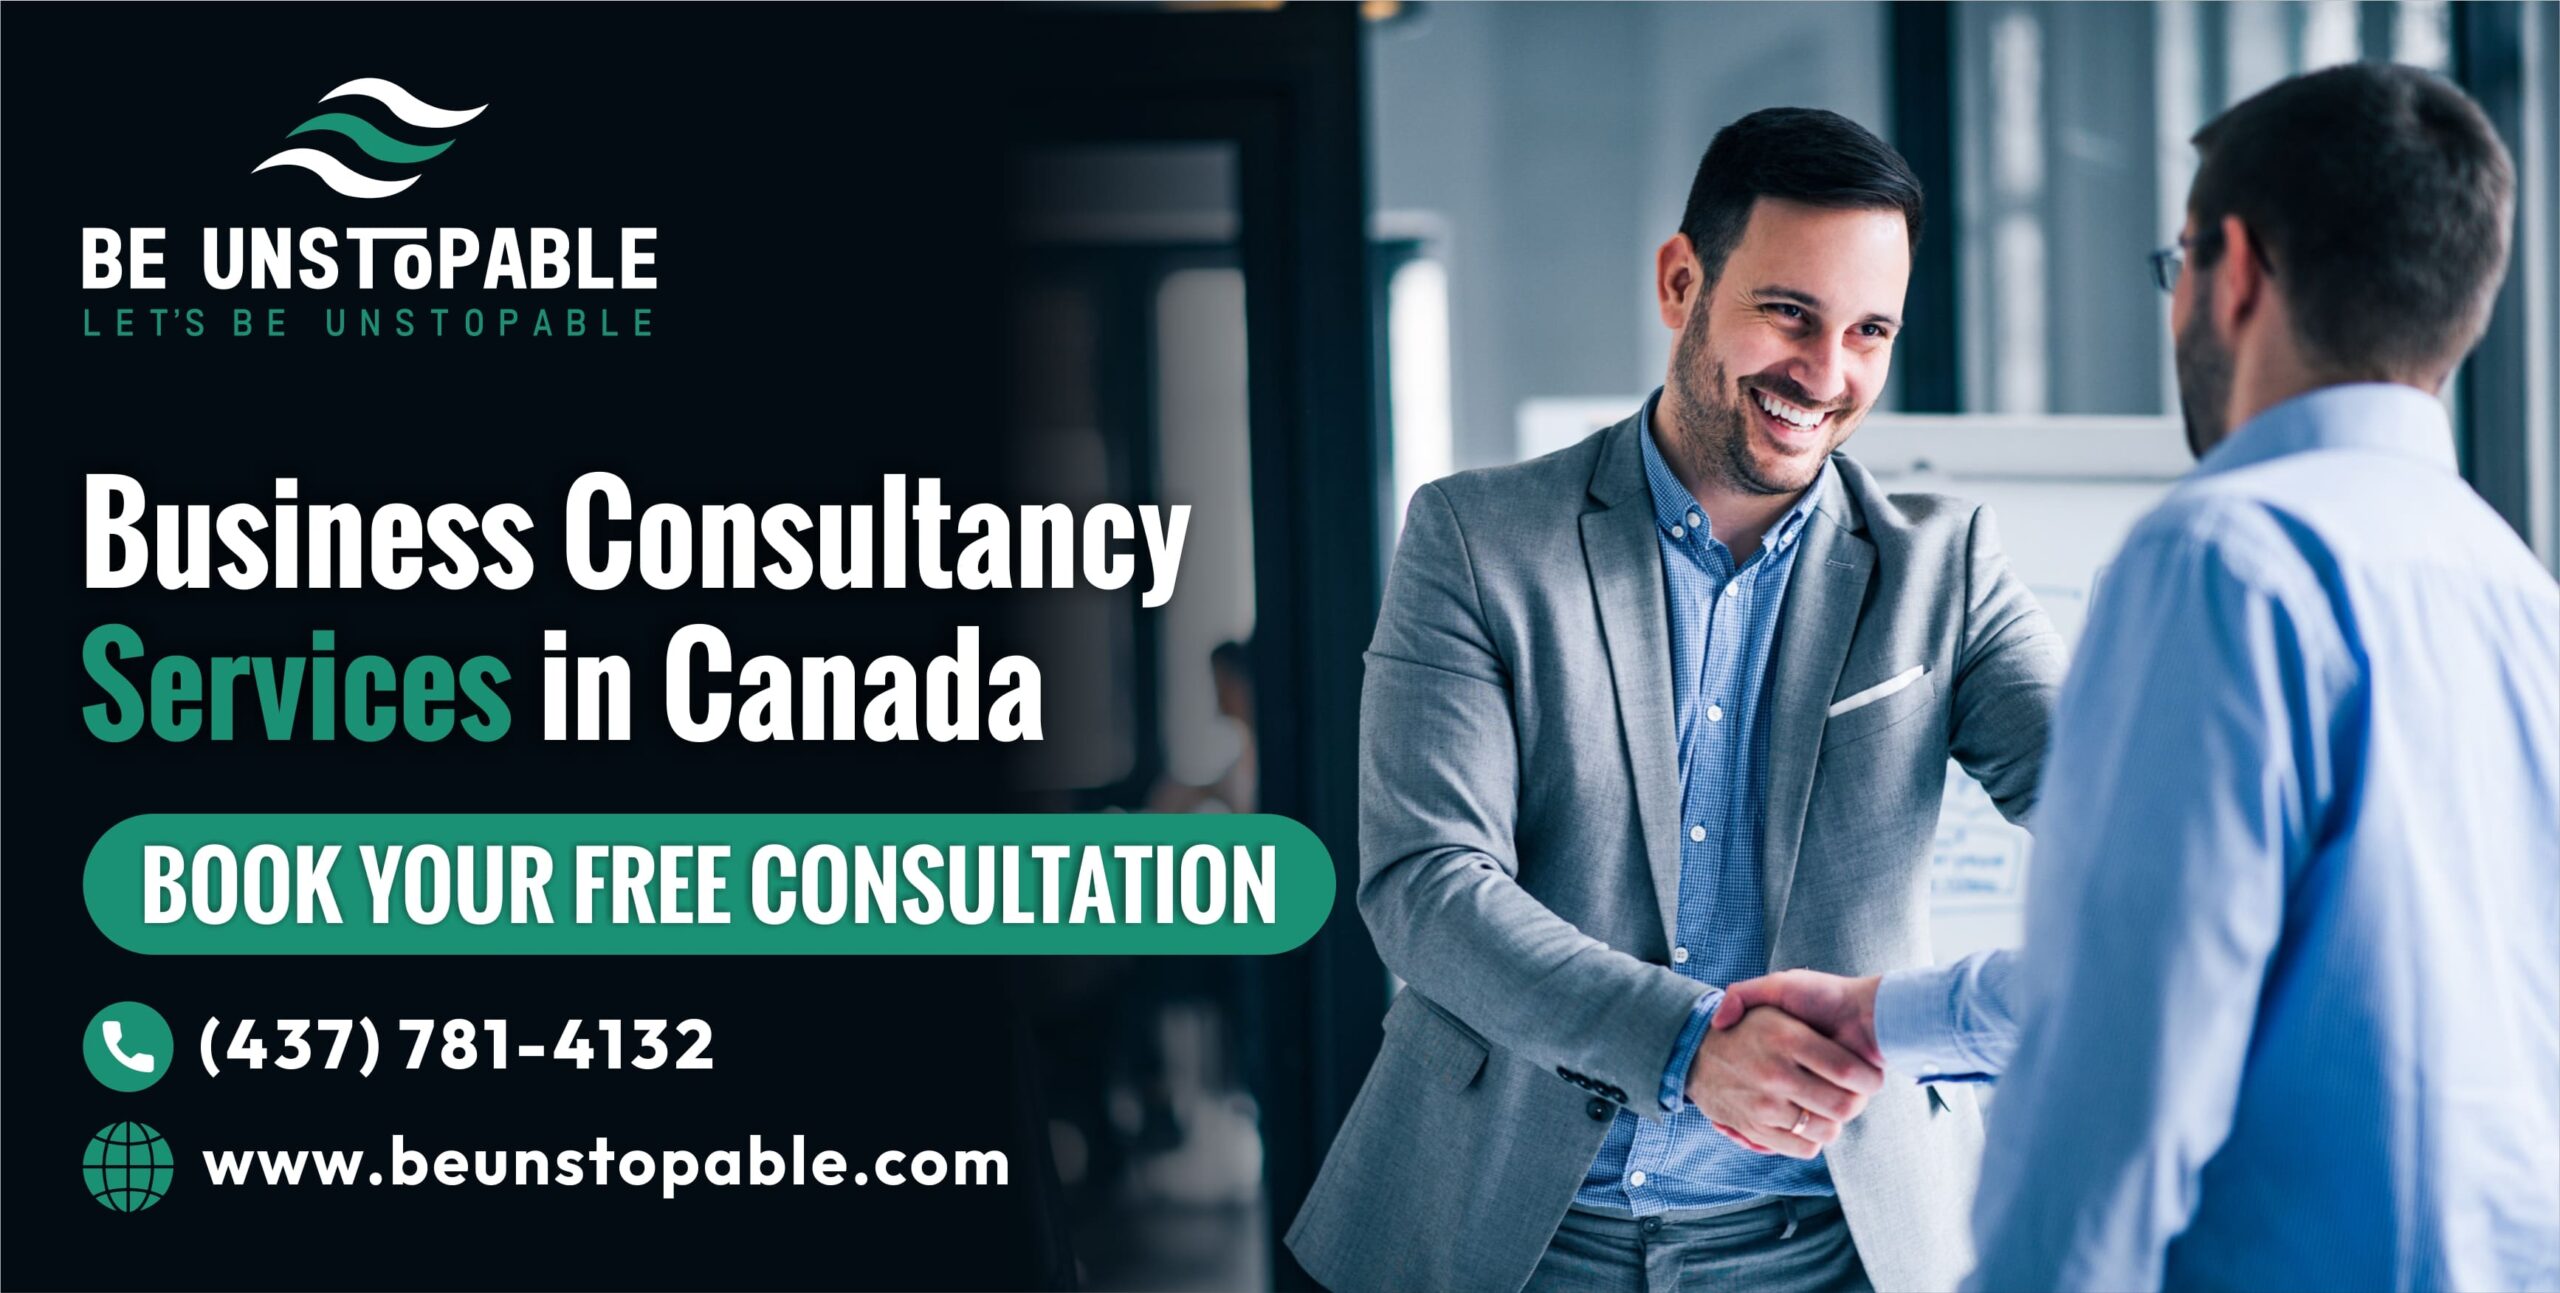 Helping Businesses Grow with Business Consultancy Services in Canada